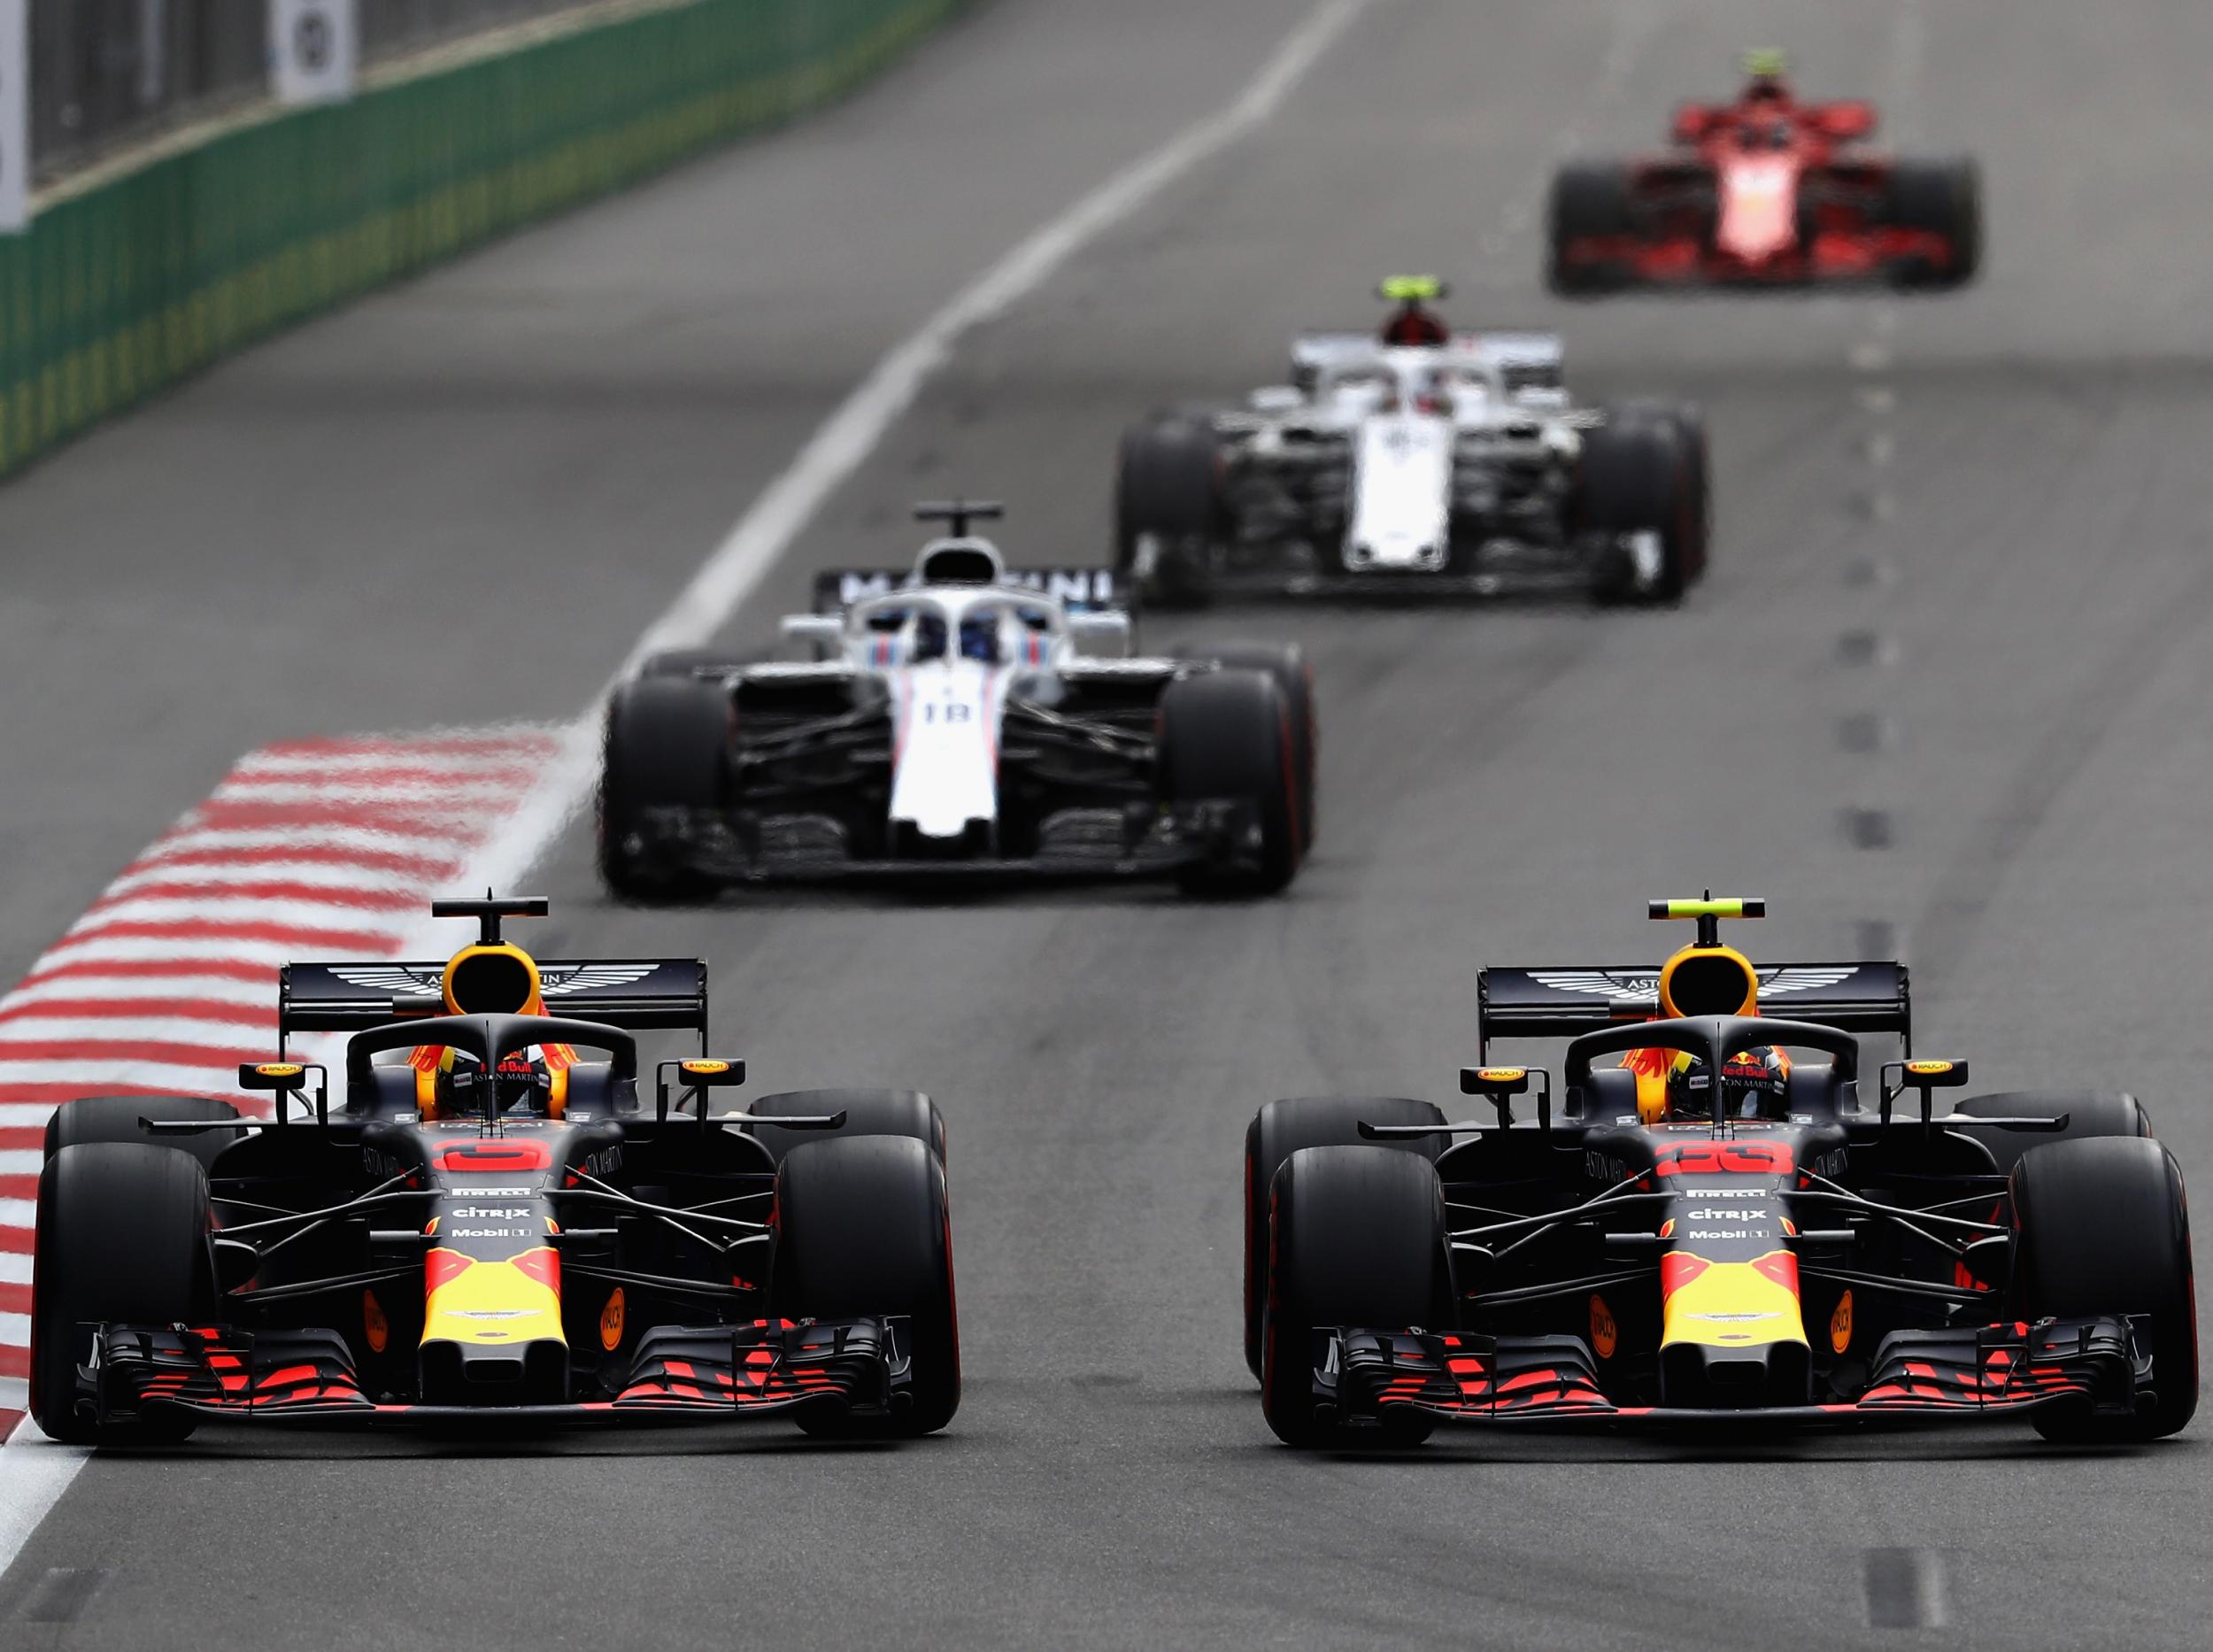 F1 want to increase overtaking